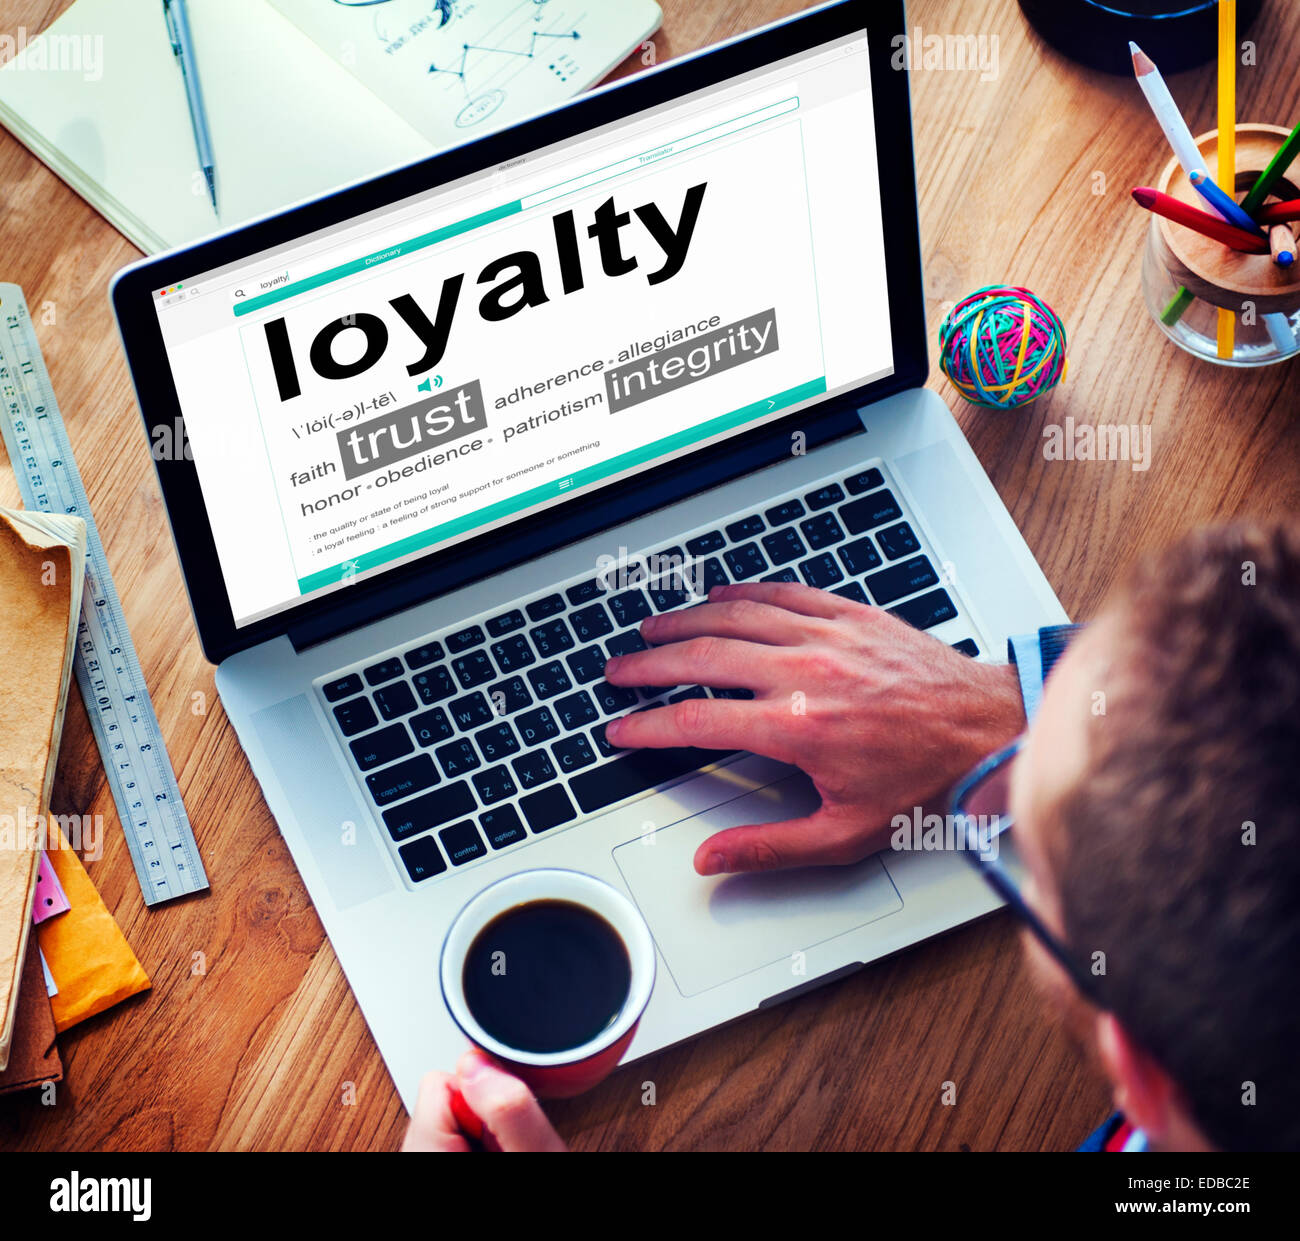 Digital Online Dictionary Meaning Loyalty Concept Stock Photo